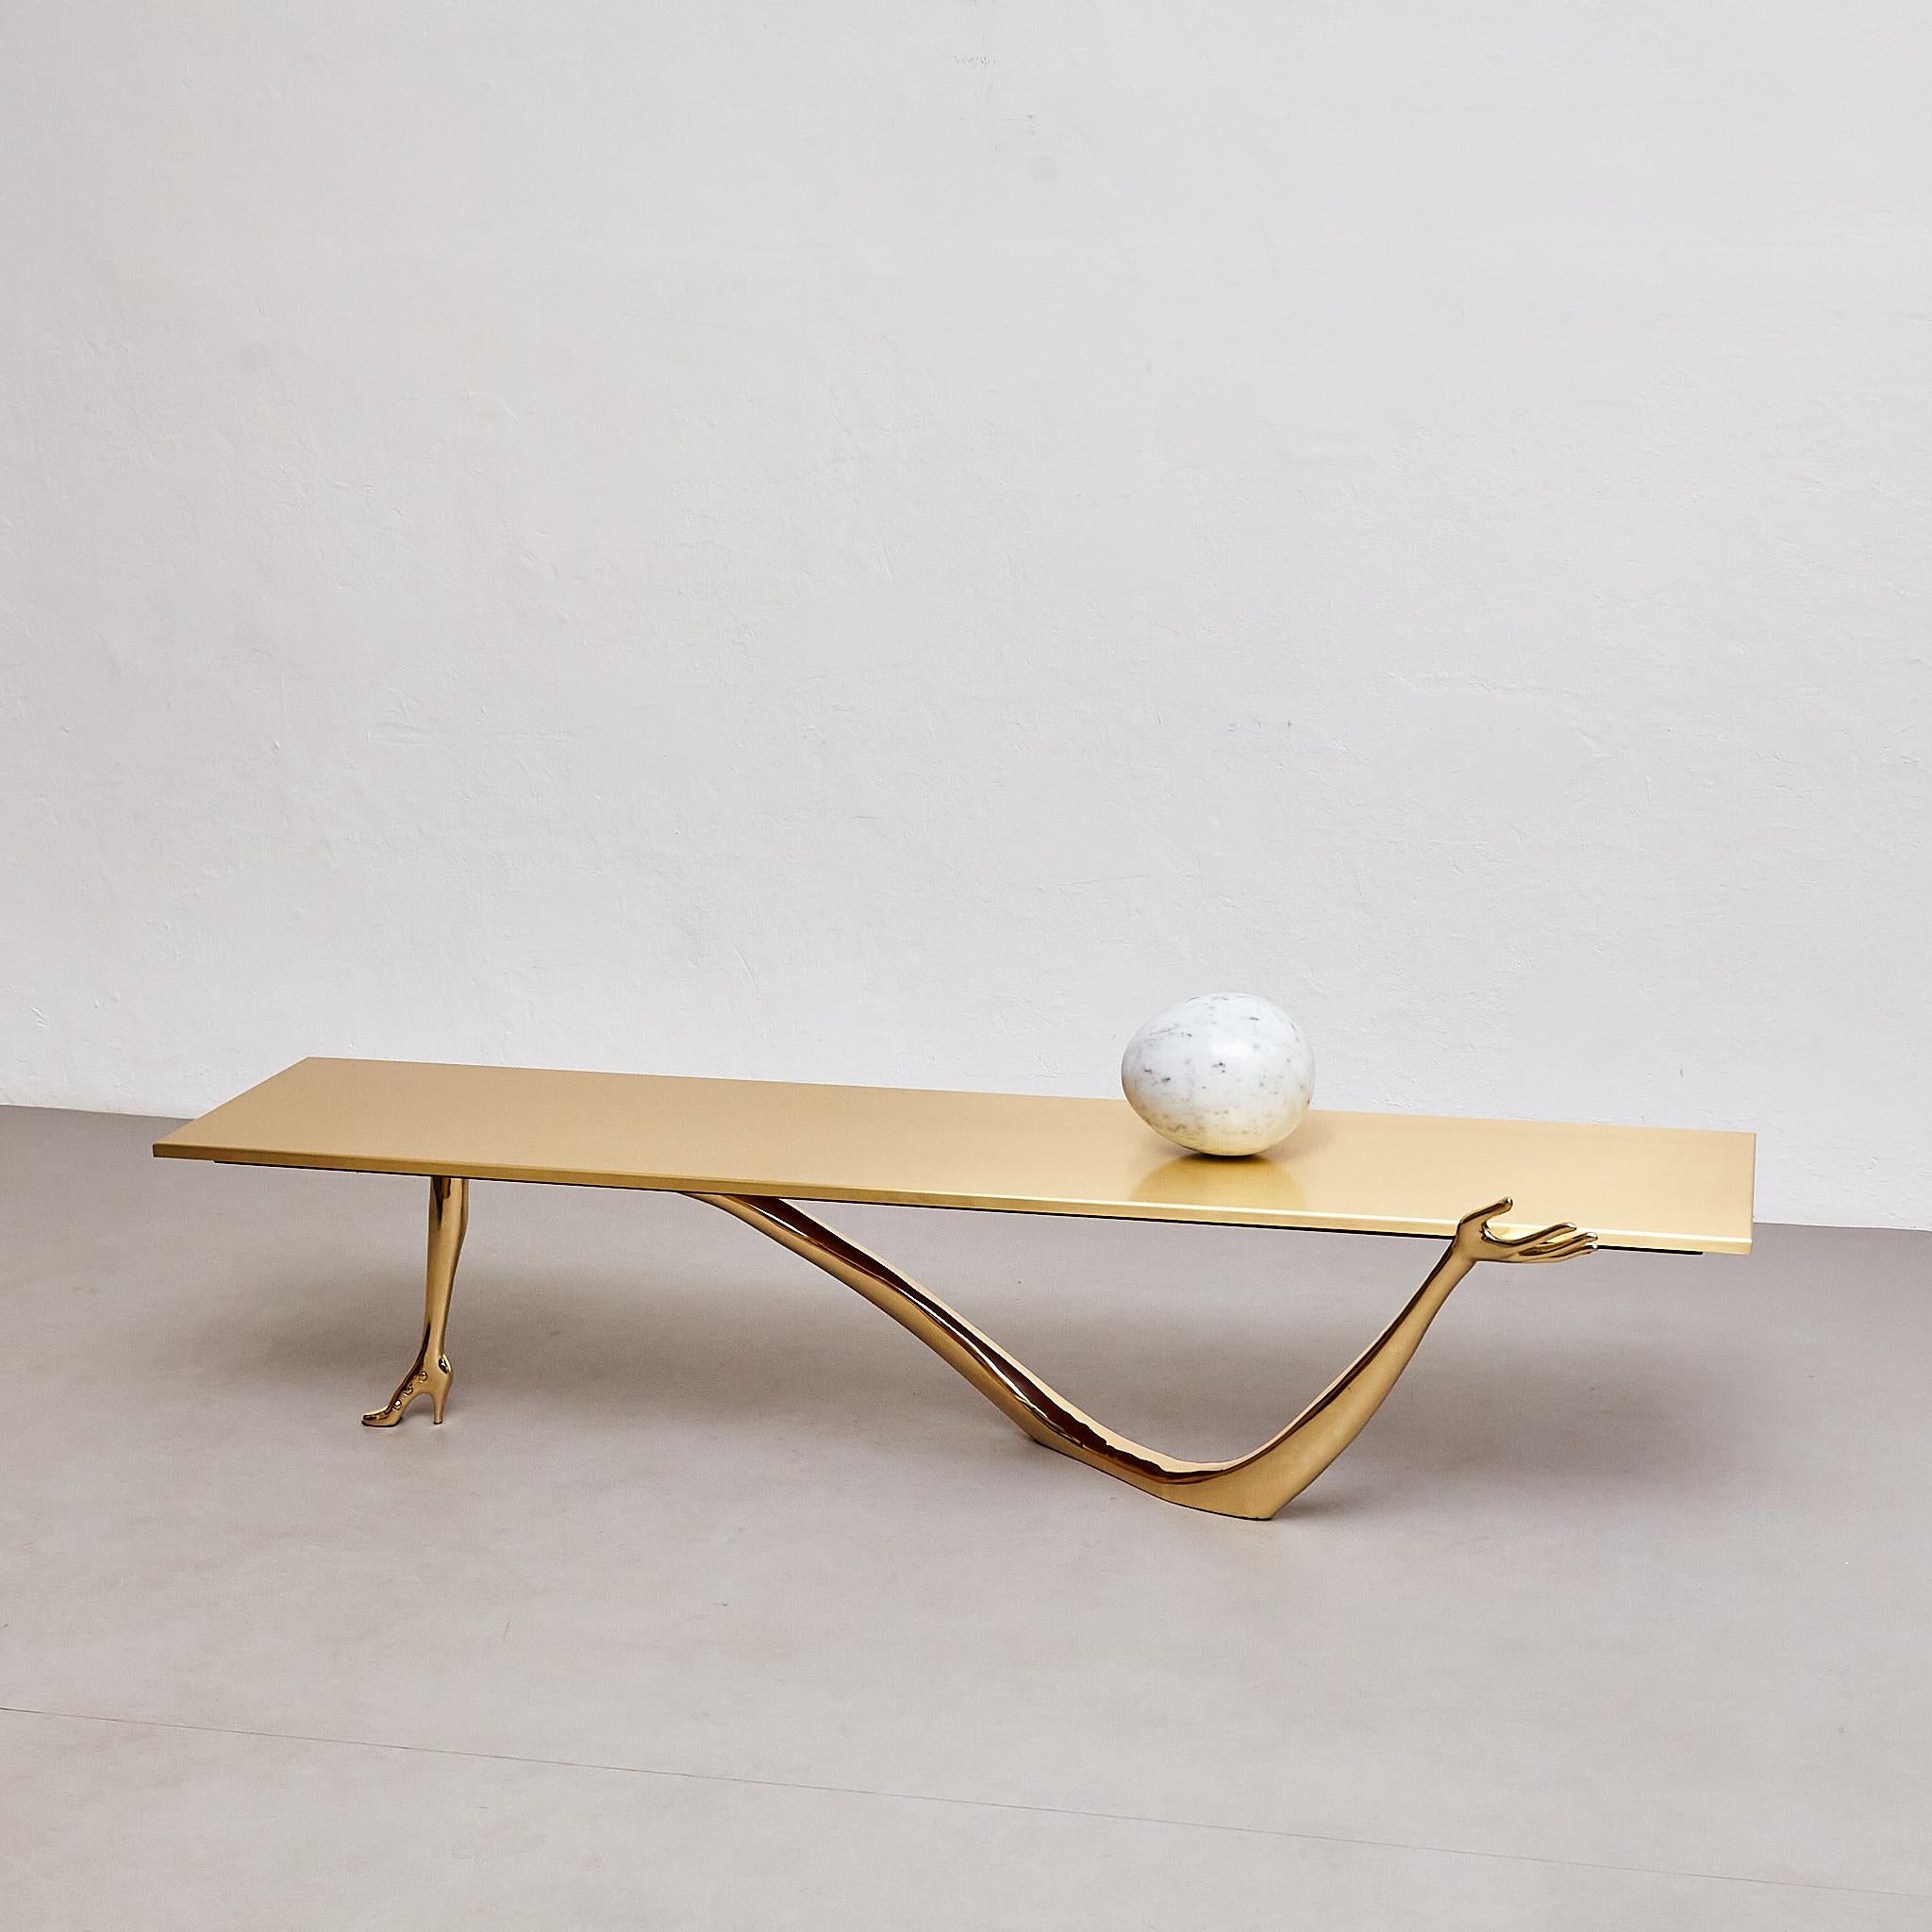 Spanish Elegance Redefined: The Leda Low Table by Dalí and BD – Artistry in Every Detail For Sale